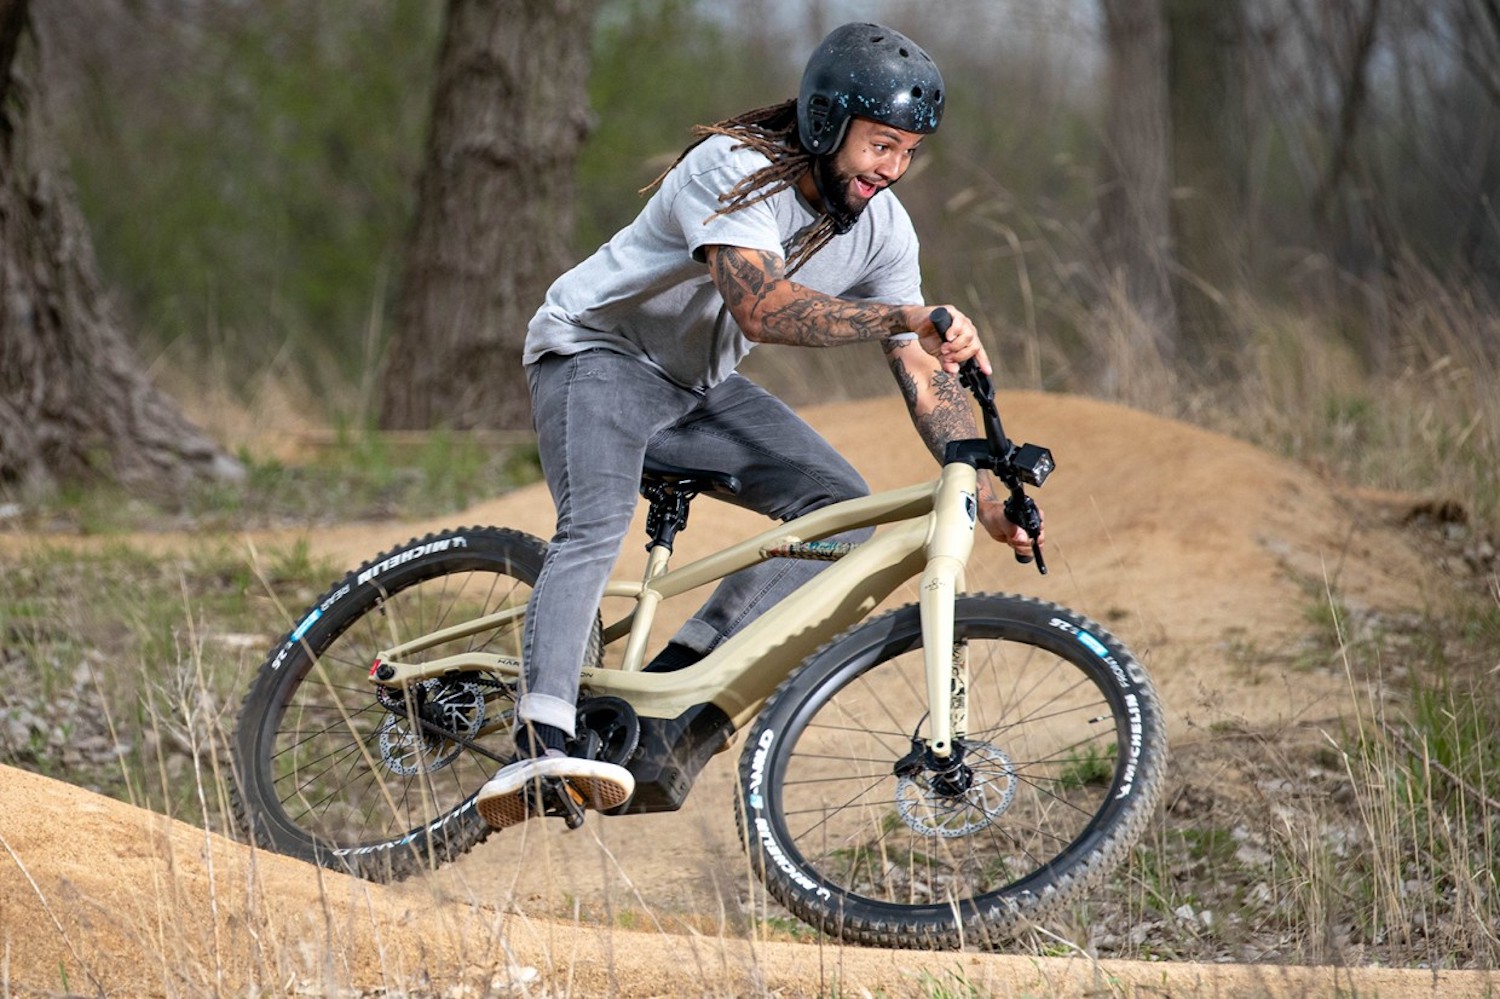 Harley-Davidson's electric bicycle brand, Serial 1, whose new Bash/MTN has no front or rear suspension